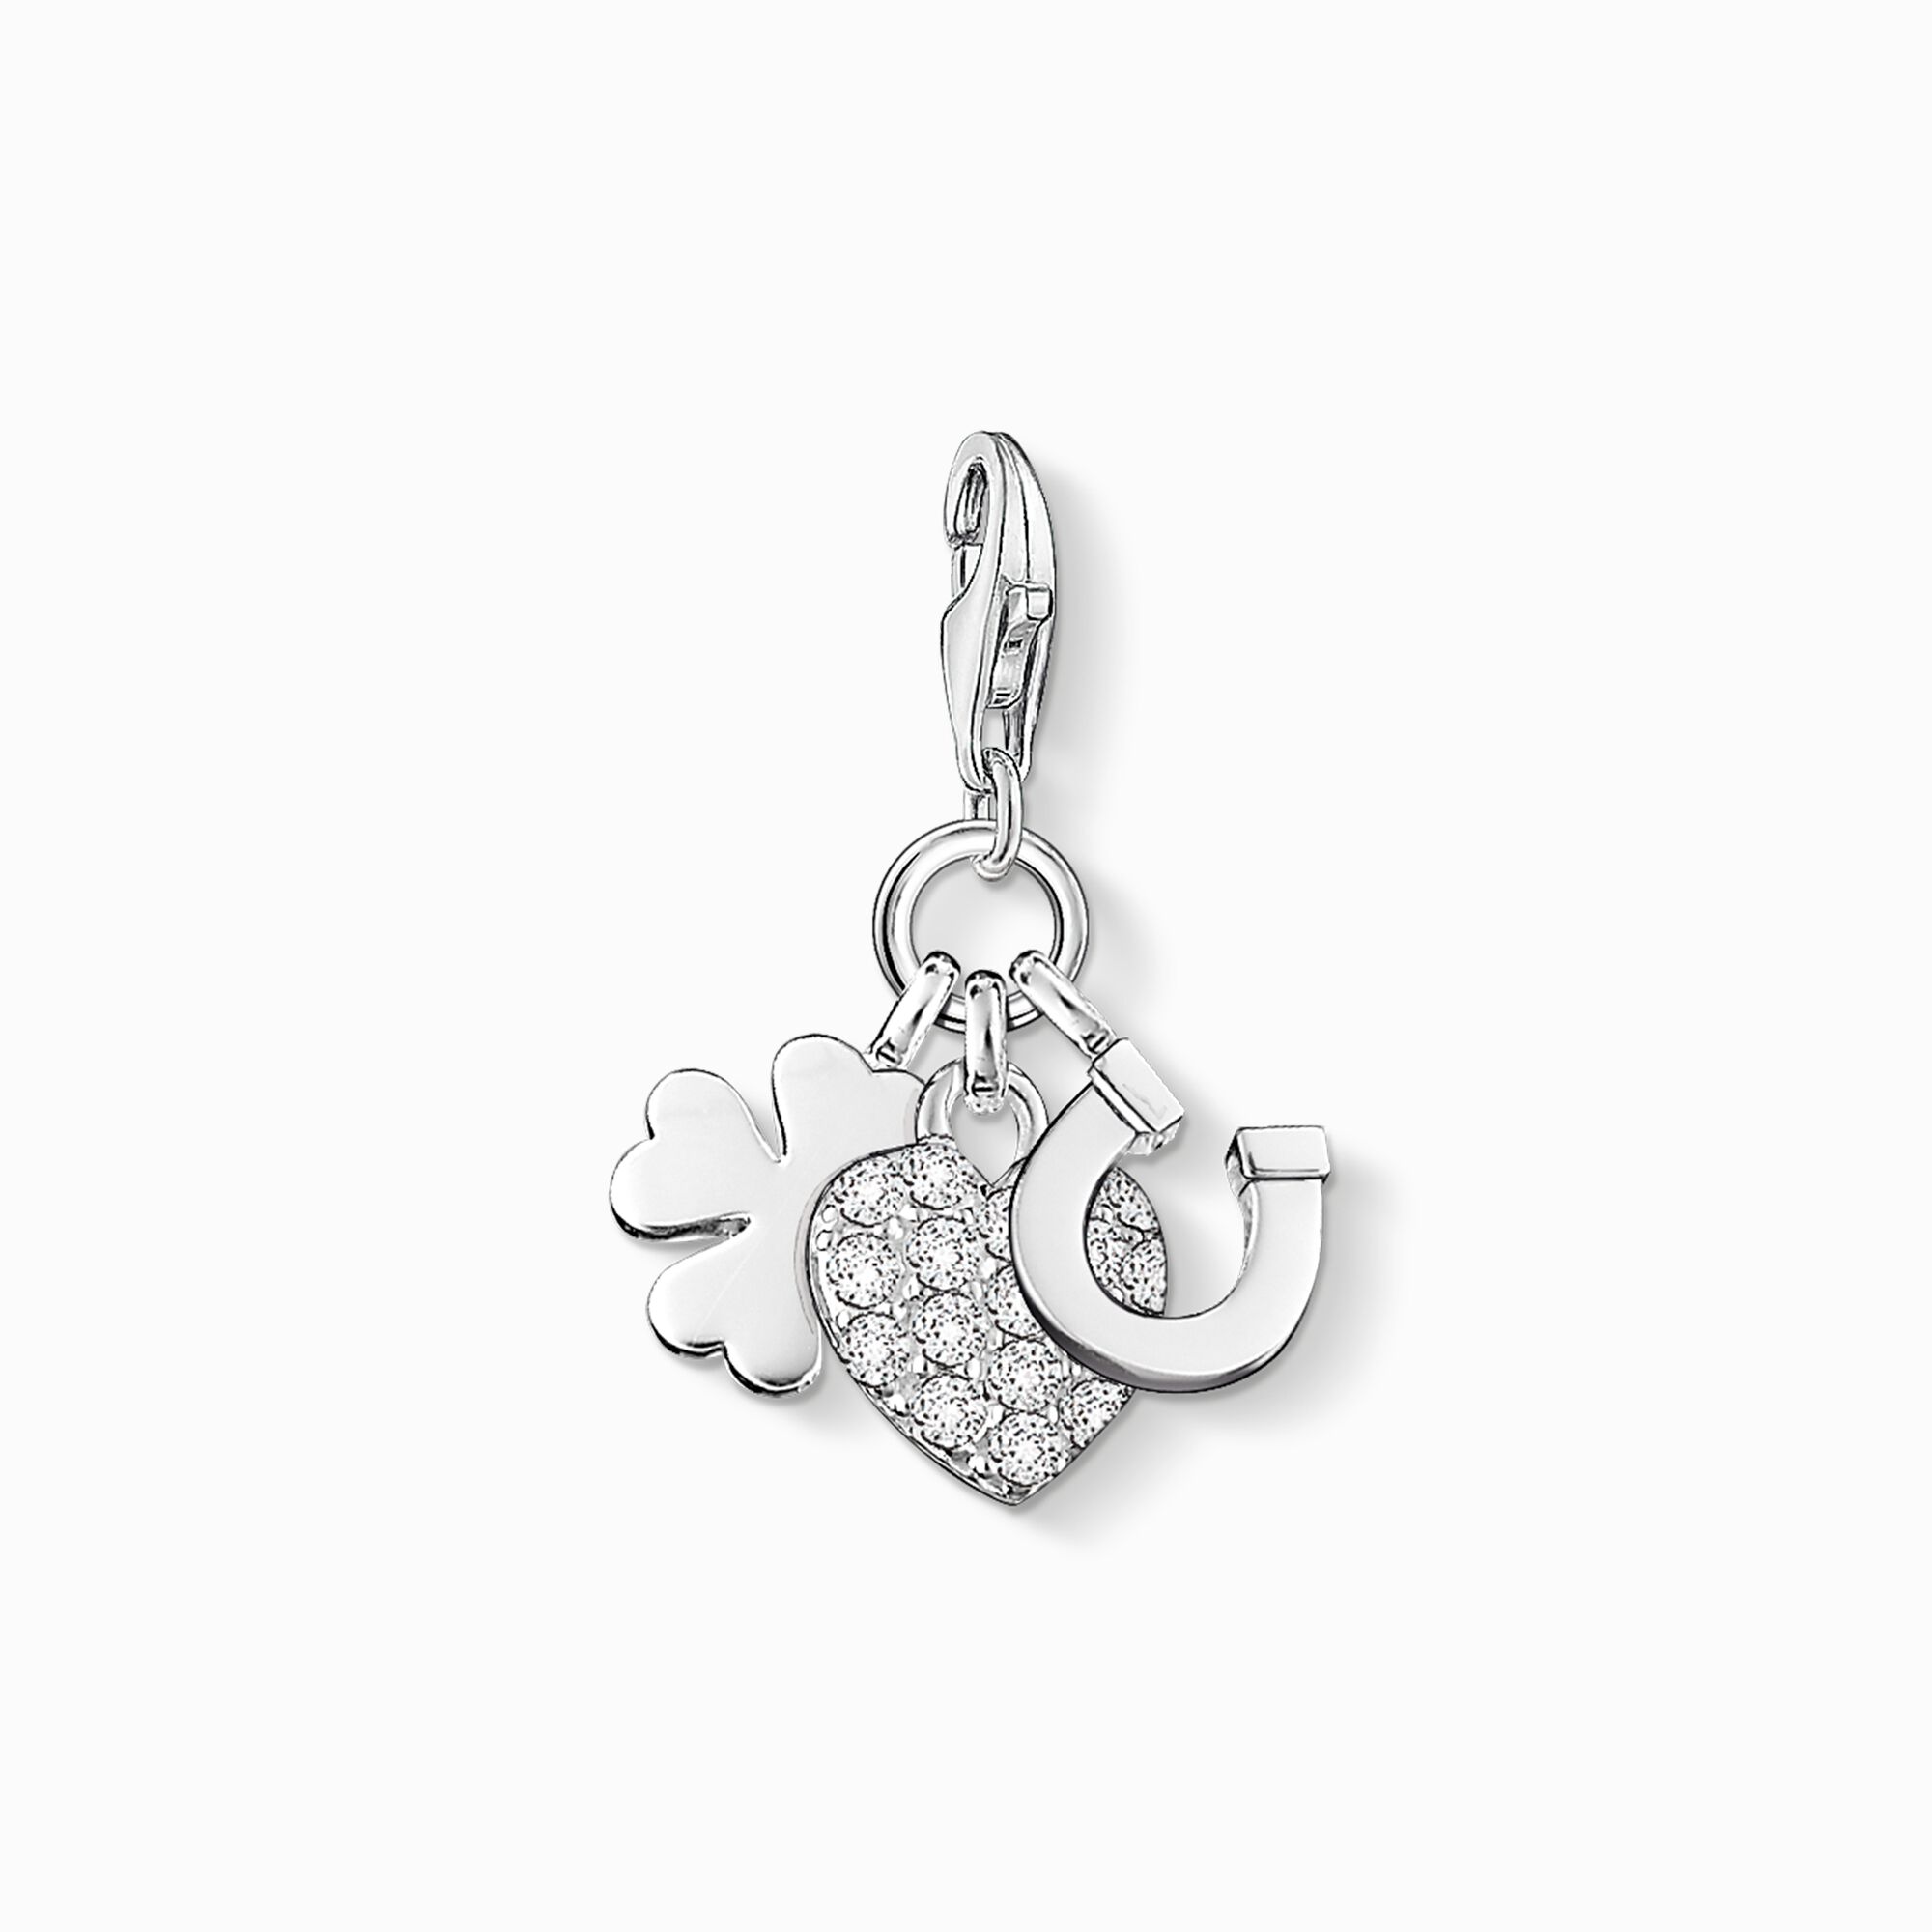 Charm pendant good luck from the Charm Club collection in the THOMAS SABO online store